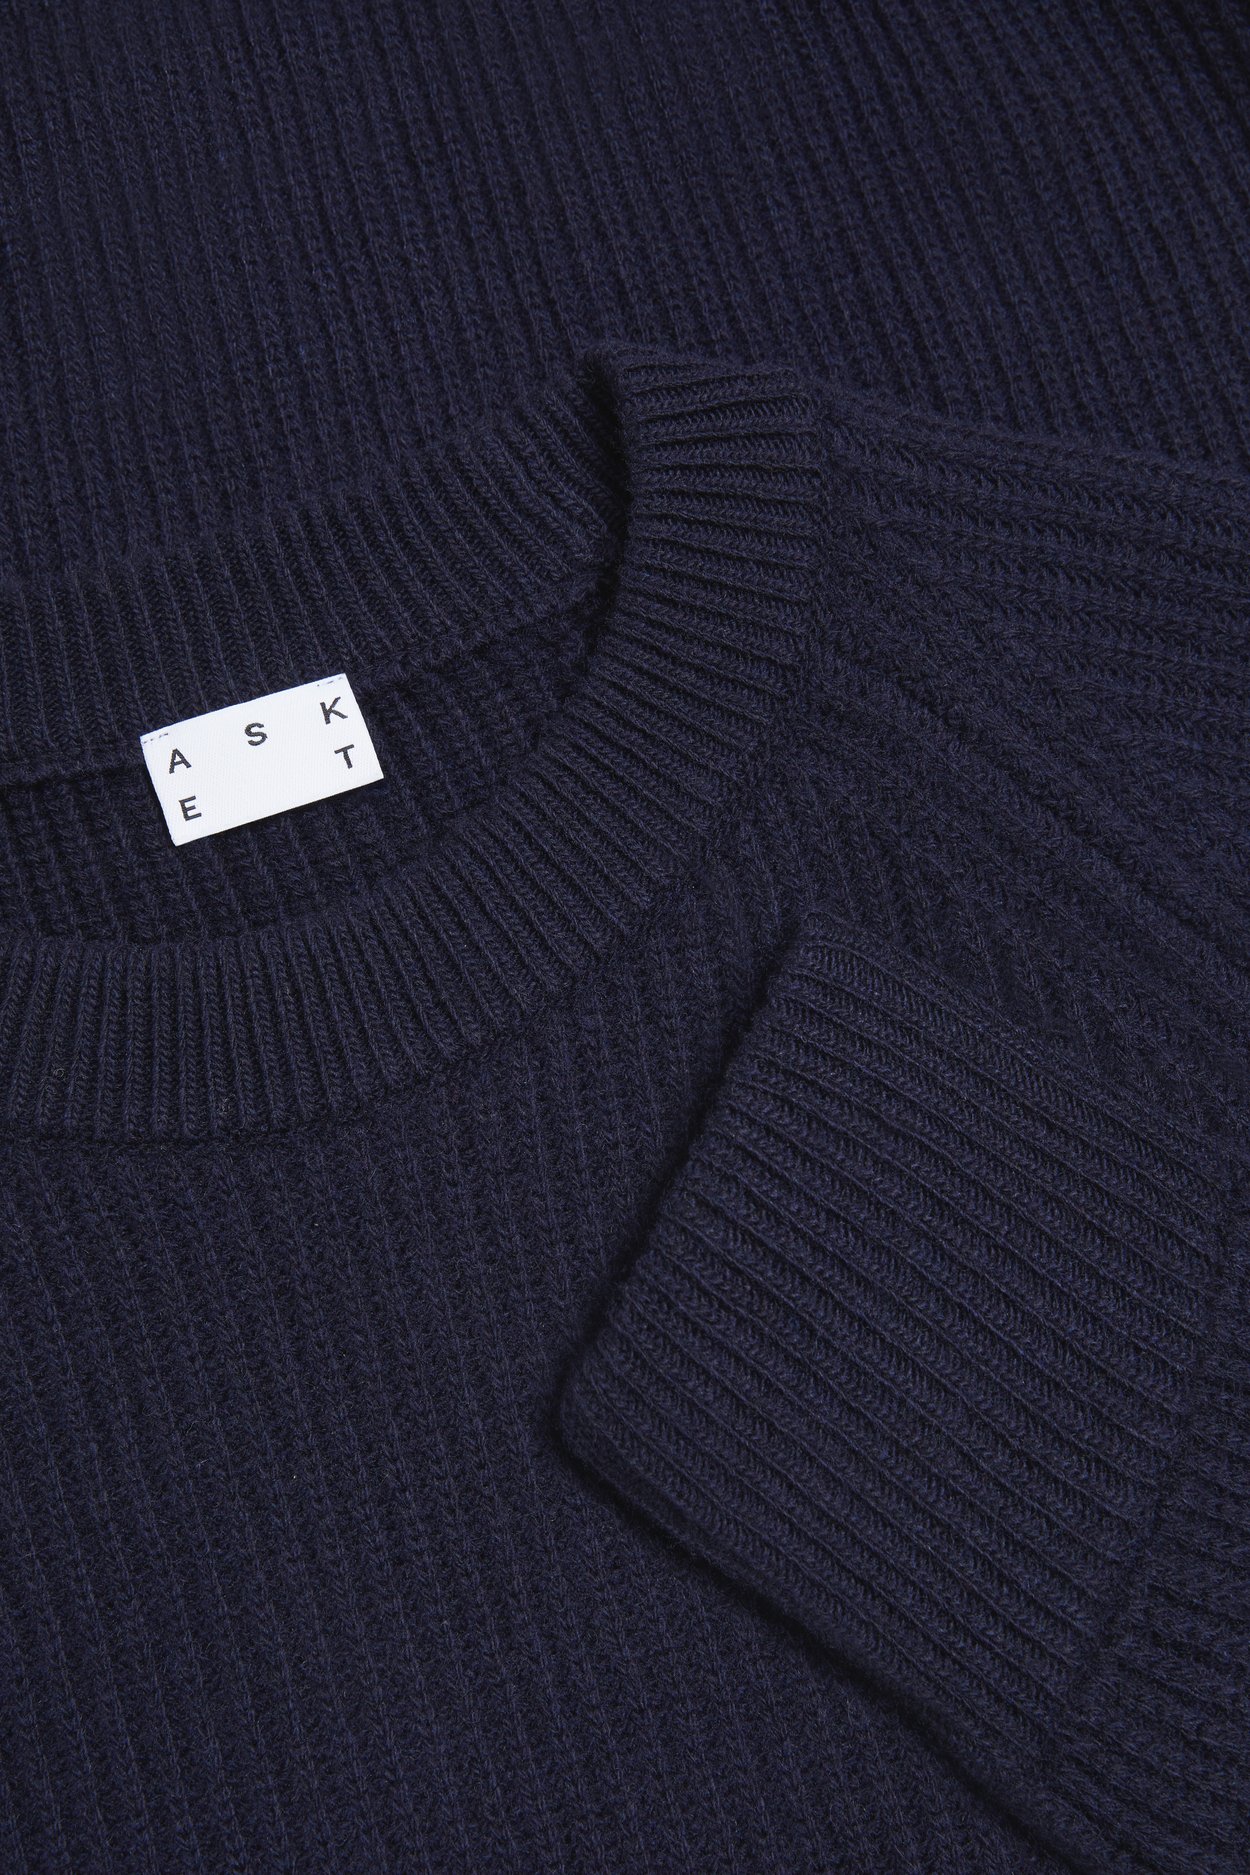 The Heavy Wool Sweater is a chunky knit from 100% recycled wool